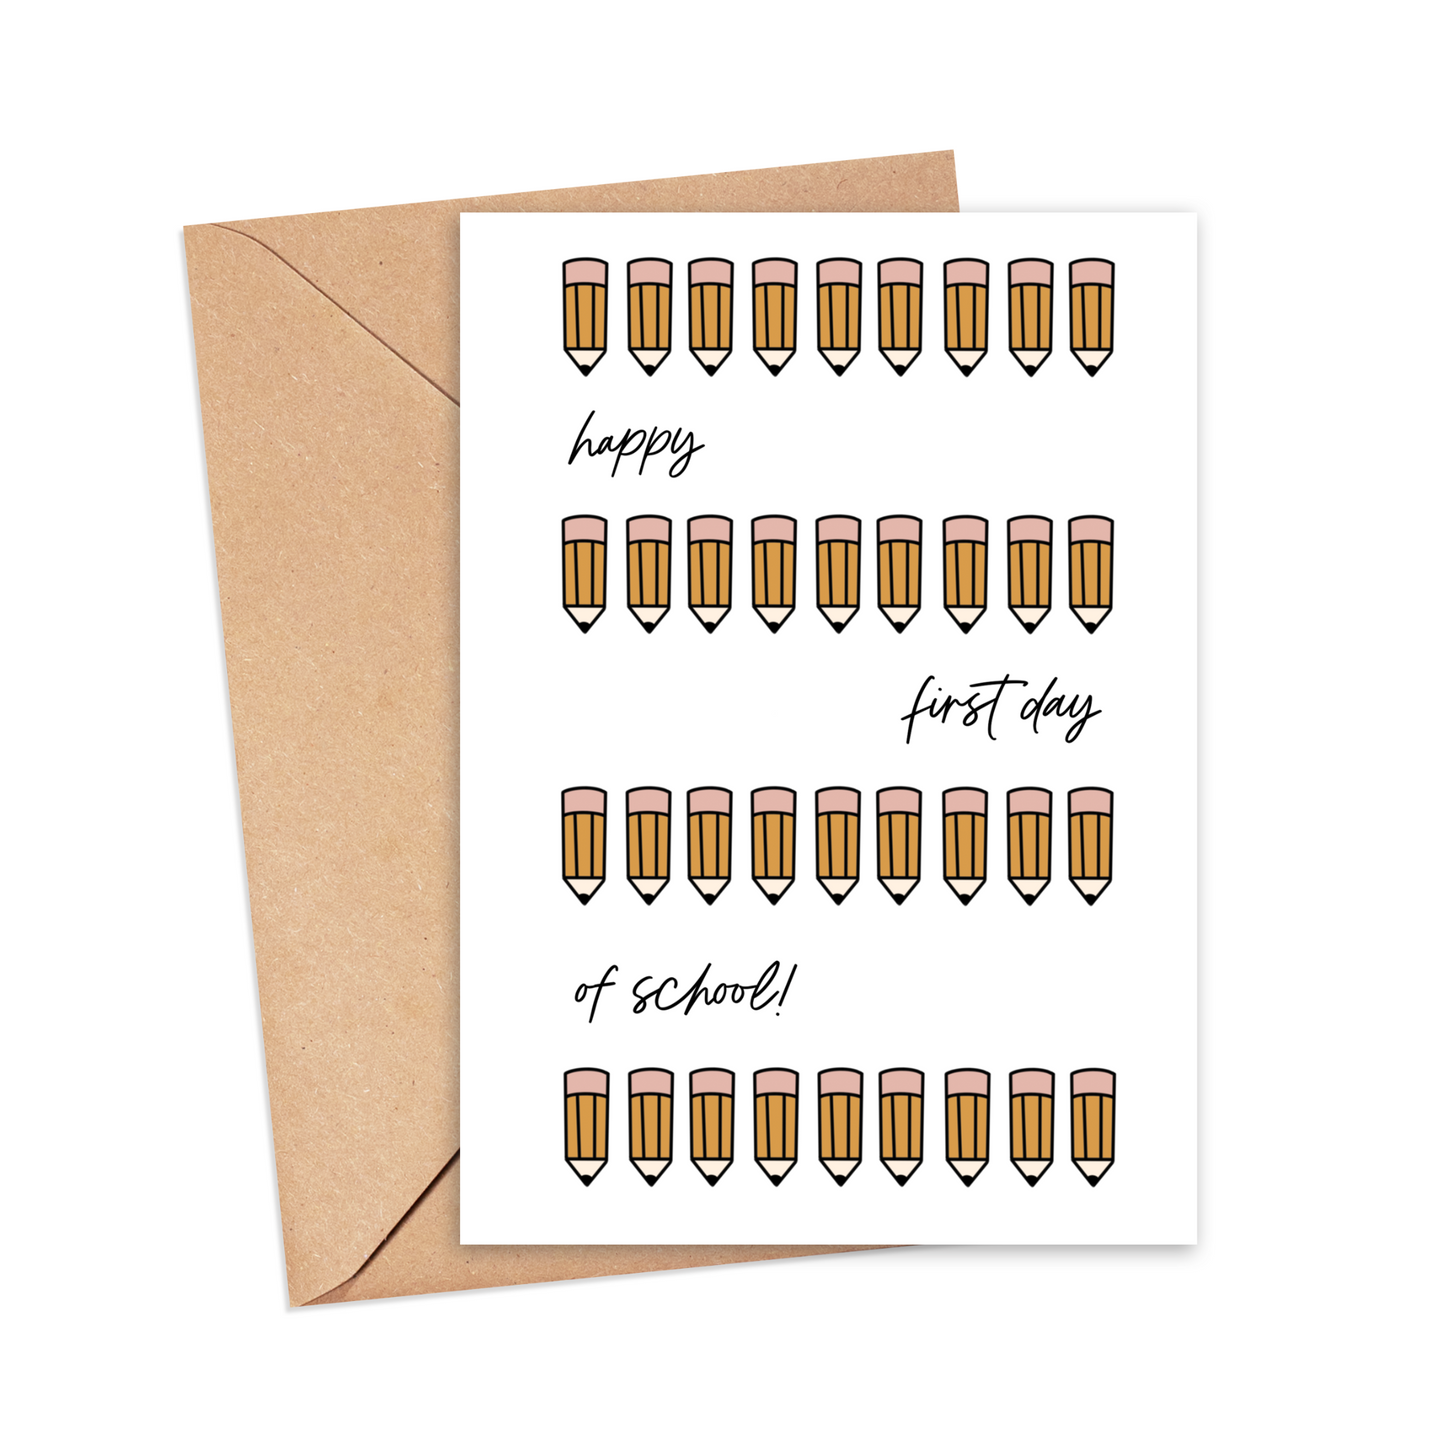 Happy First Day of School Pencils Card Simply Happy Cards